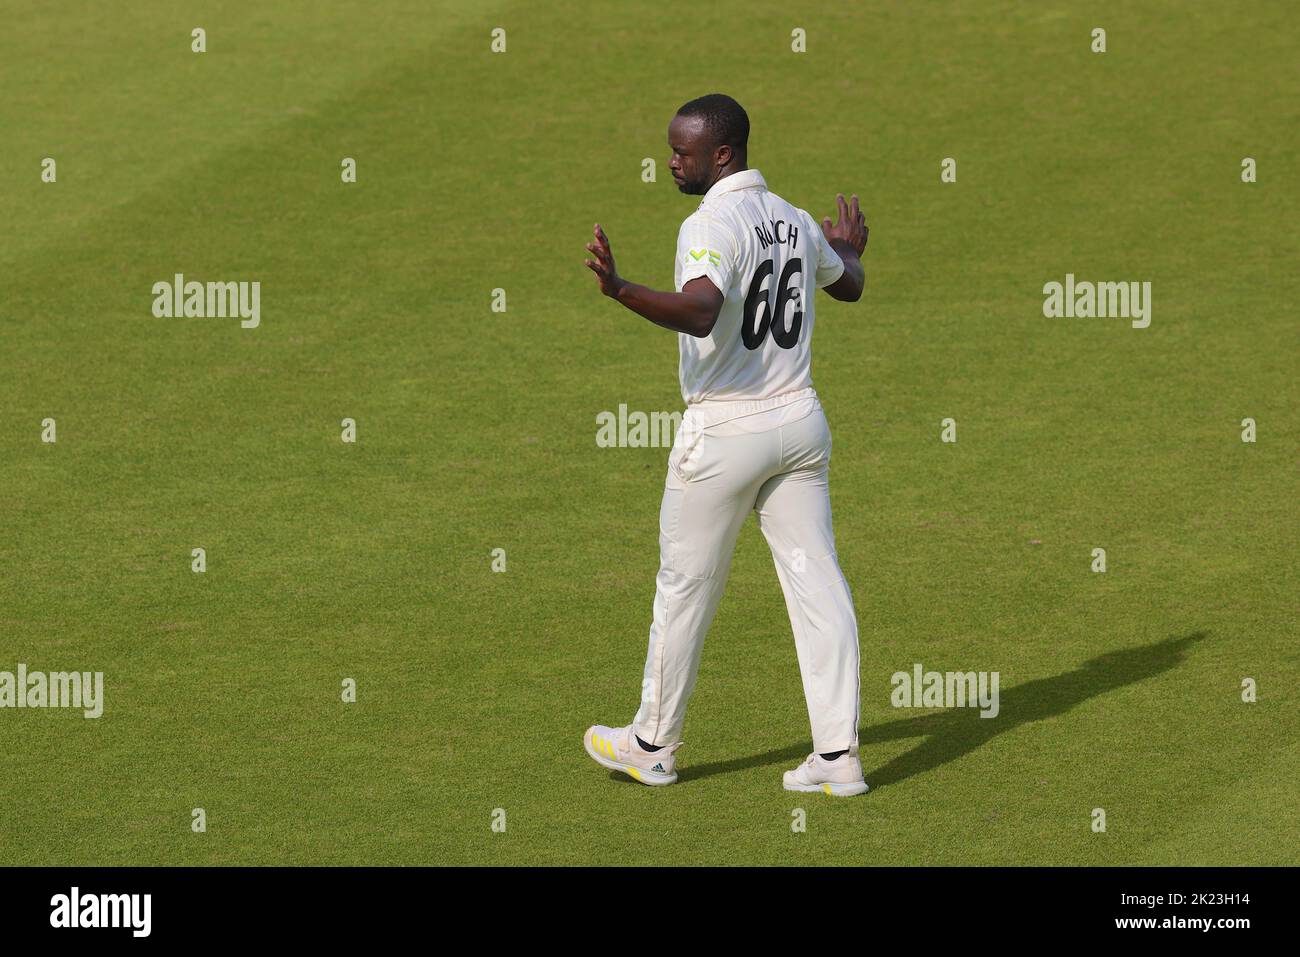 22 September, 2022. London, UK. Surrey’s Kemar Roach acknowledges the applause as Surrey take on Yorkshire in the County Championship at the Kia Oval, day three David Rowe/Alamy Live News Stock Photo